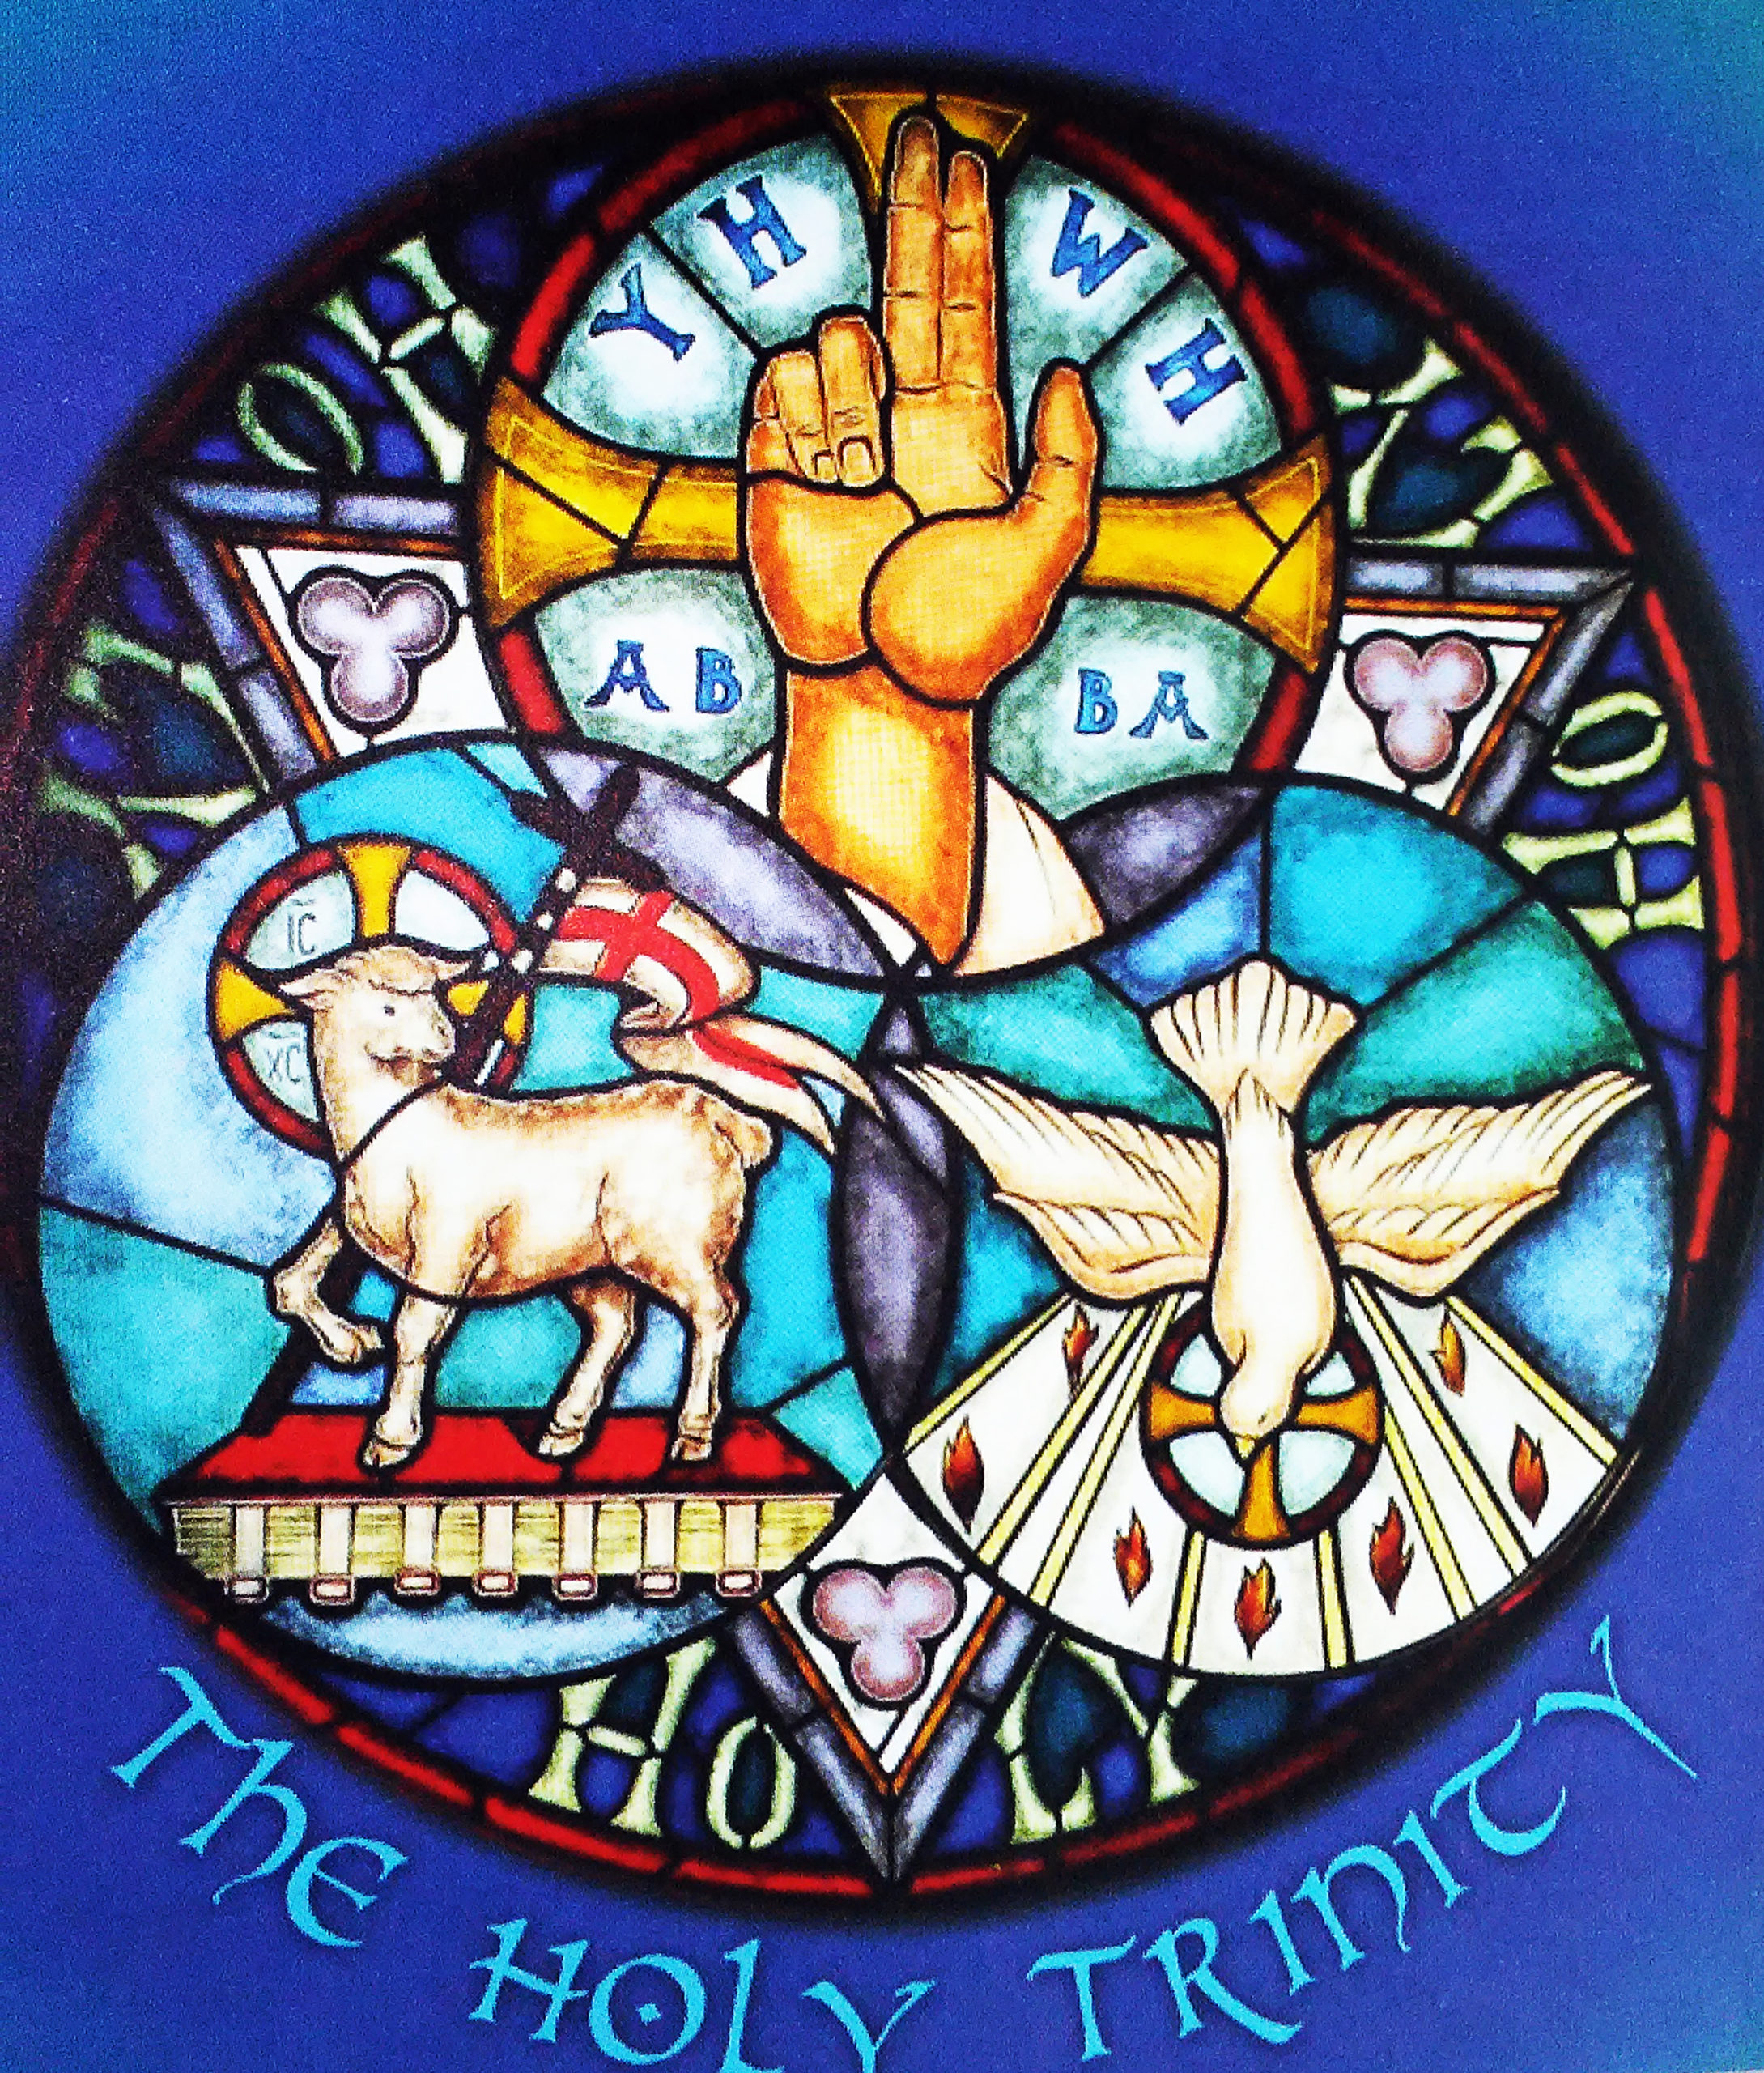 Prayers of the Church, Holy Trinity, Cycle A (June 7, 2020)